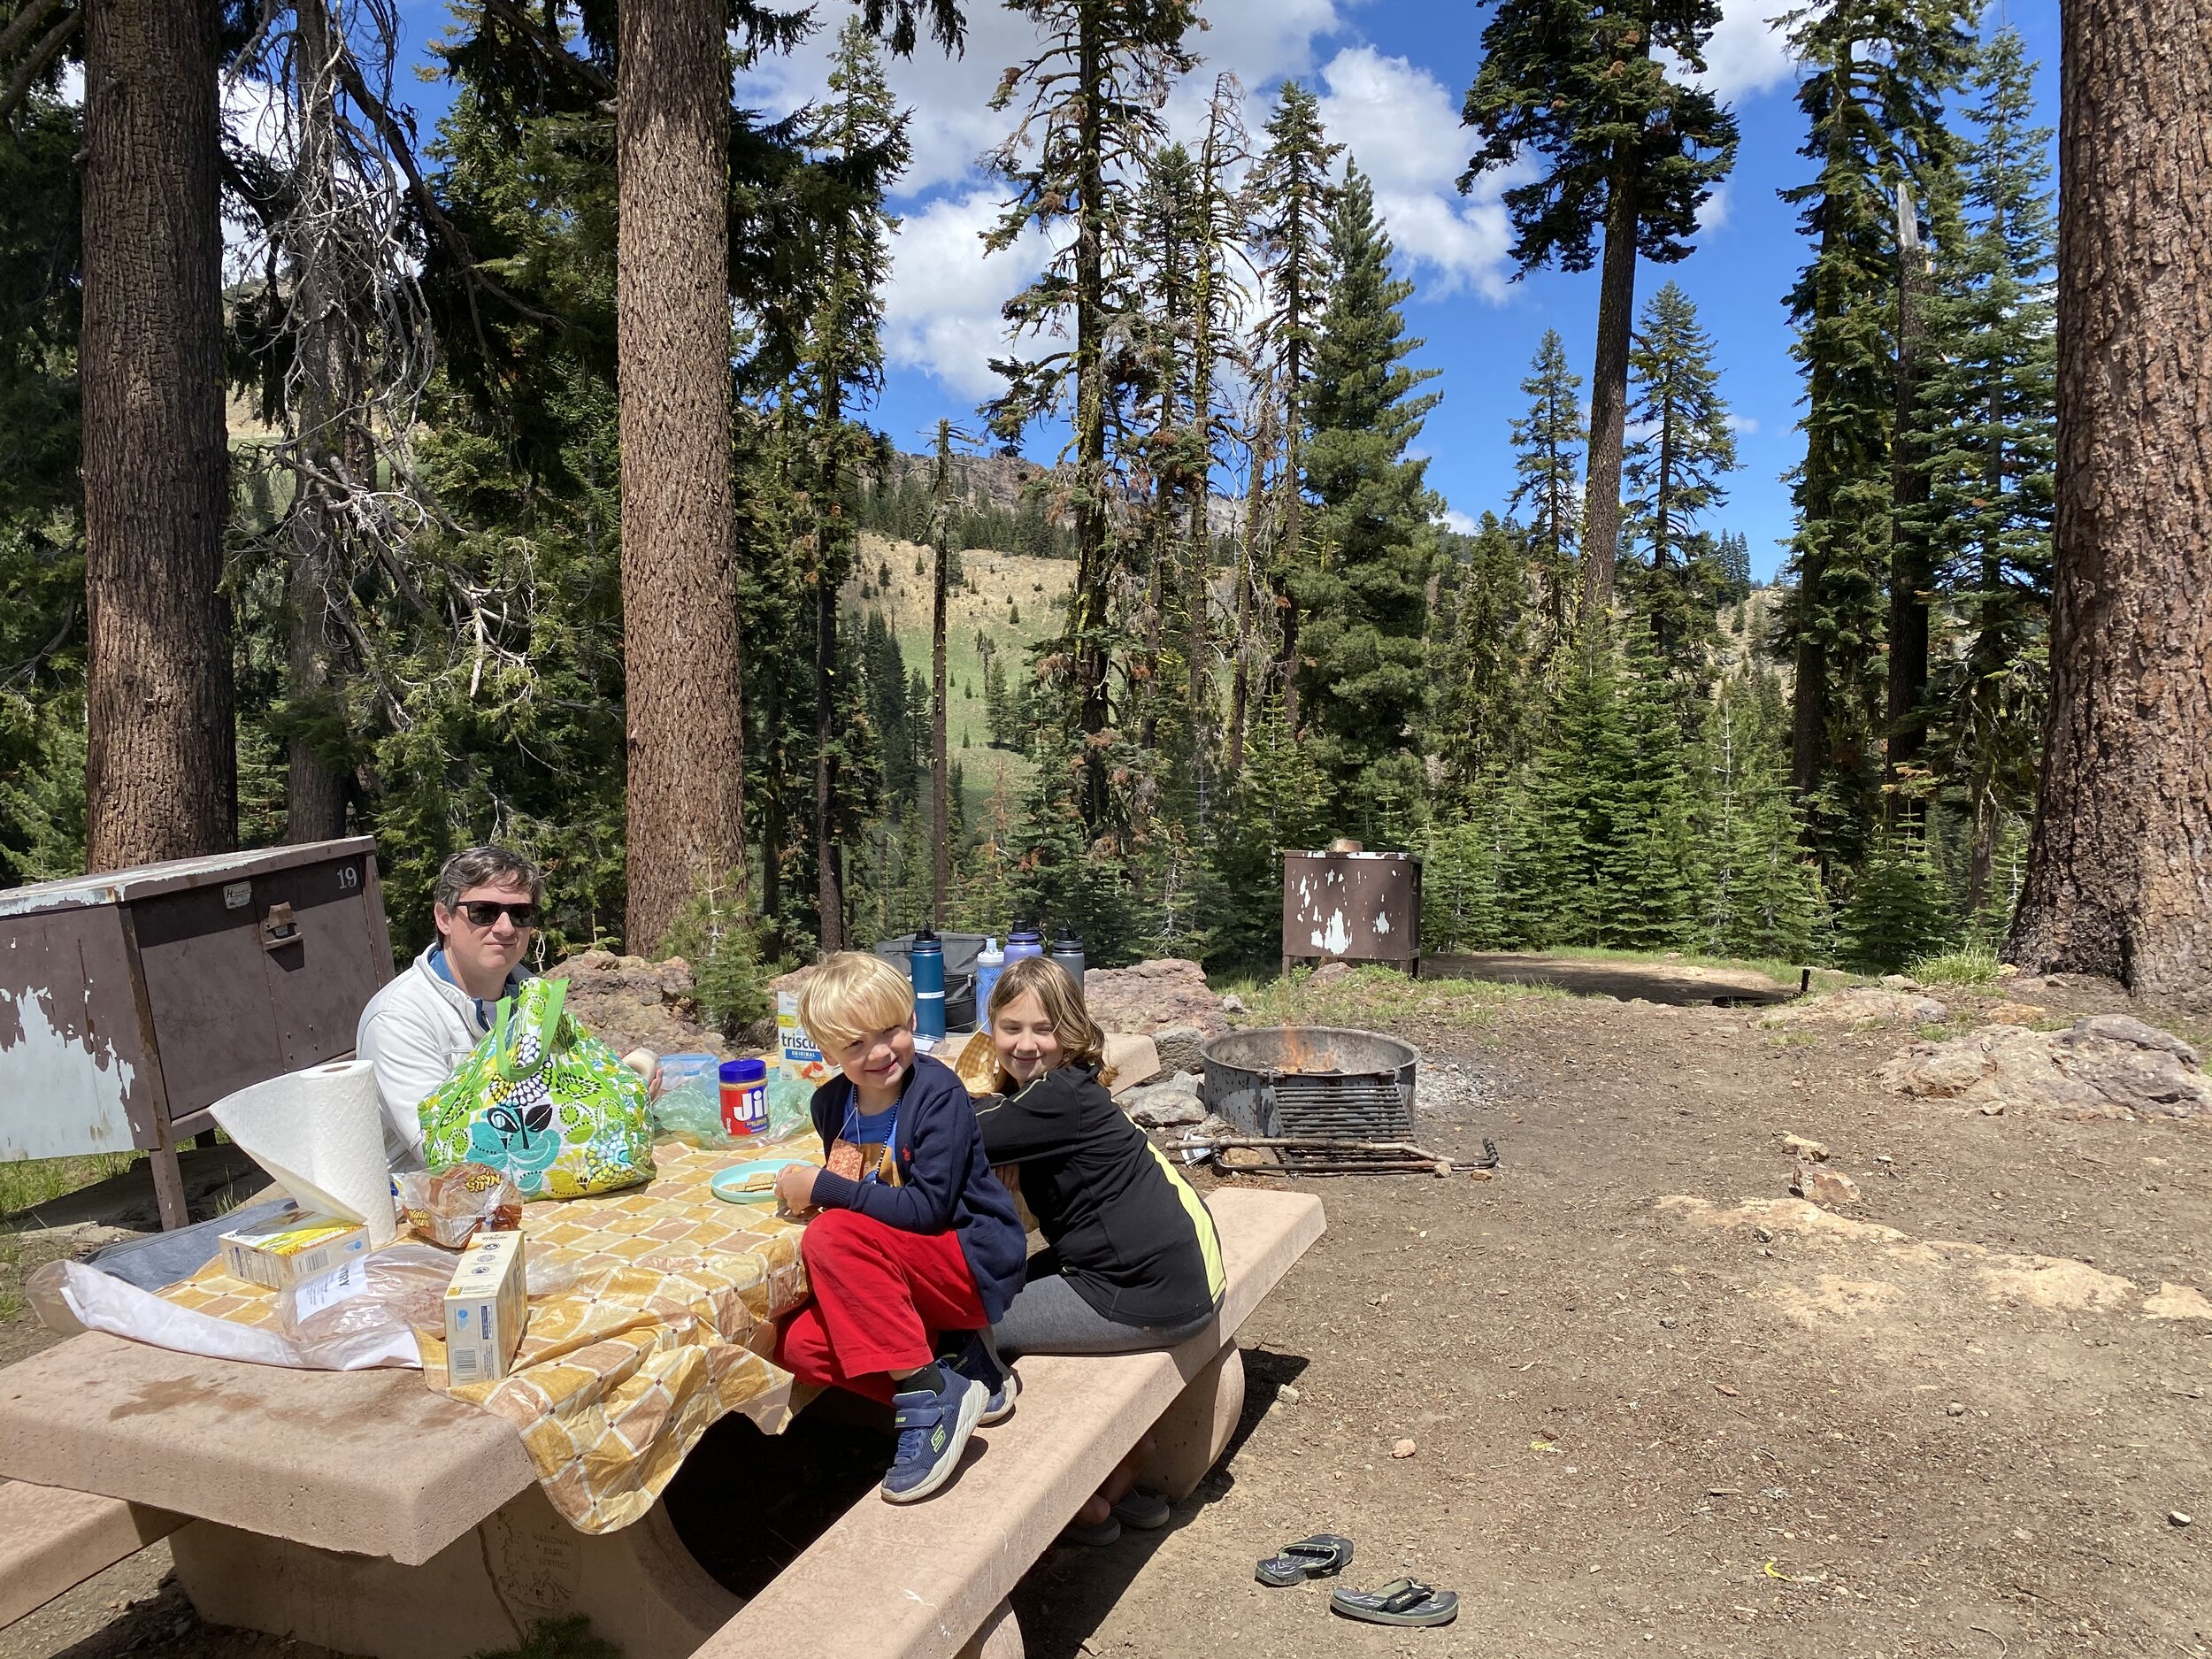 A relaxing picnic and campfire at the lovely Kohm Yah-Mah-Nee Visitor’s Center.  Photo by Karen Boudreaux, June 8, 2021